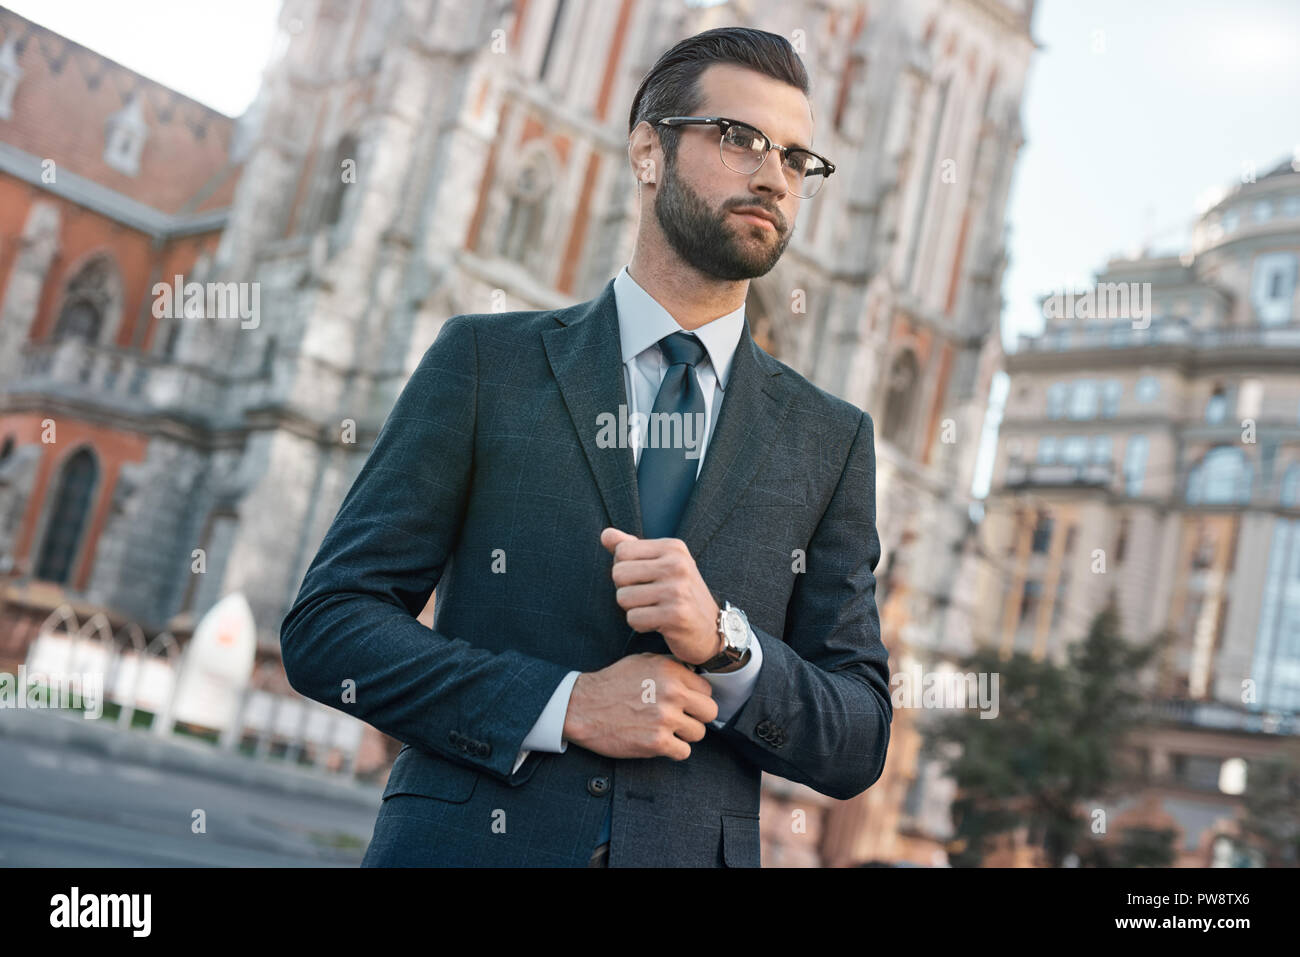 Close up profile portrait of a successful young bearded guy in suit and glasses. So stylish and nerdy. Outdoors on a sunny street, fixing his cuffs Stock Photo